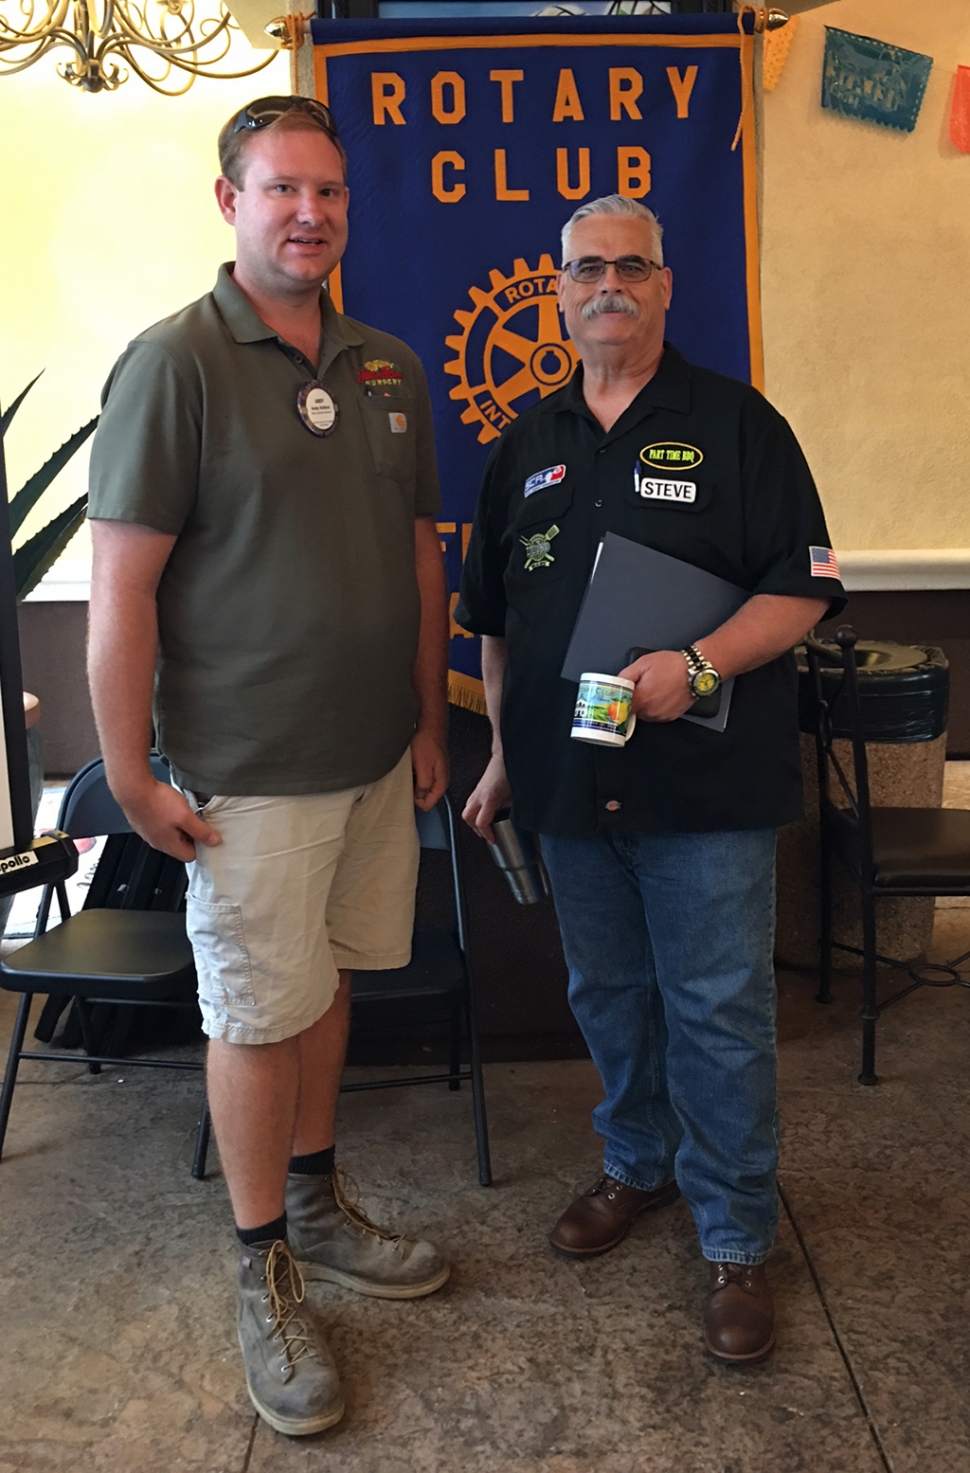 Pictured are Rotary President Andy Klittich and speaker Steve Conway of Fillmore who qualified for the World Finals to held in Arizona and spoke with the club about his upcoming benefit for the Boys & Girls Club of SCV. Photo courtesy Rotary Club Member Martha Richardson.